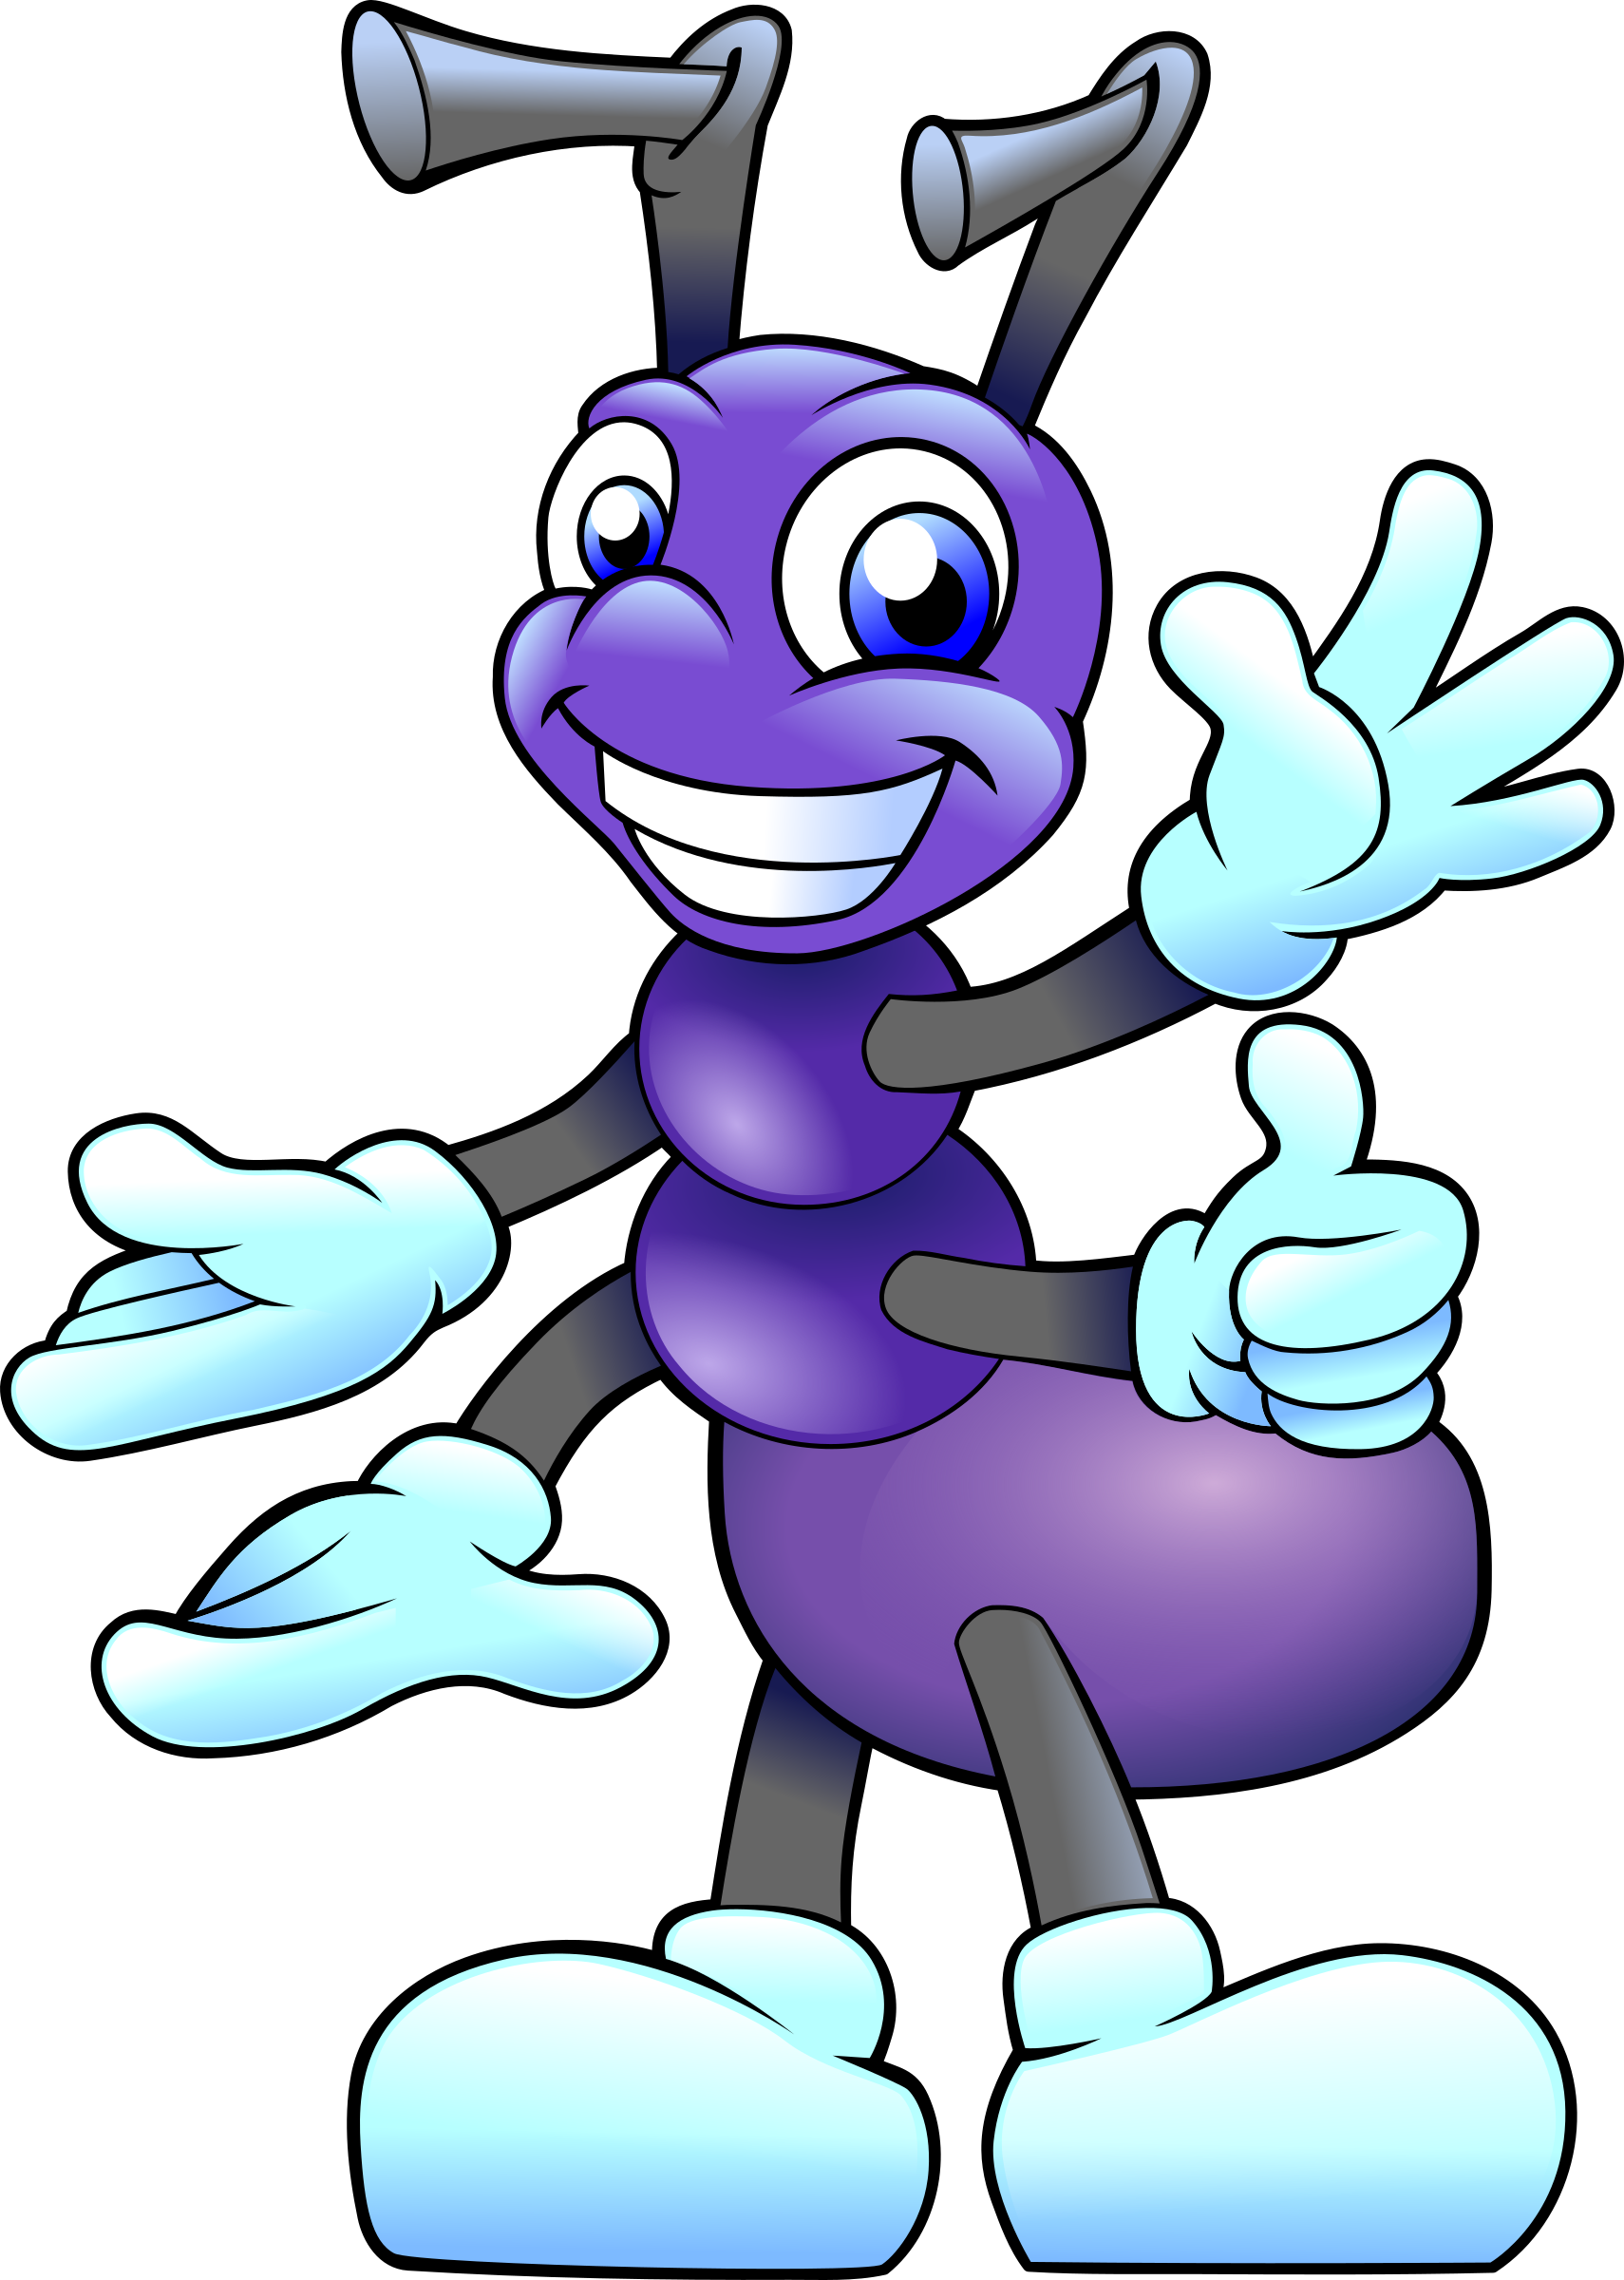 Purple ant by schade. Ants clipart friendly